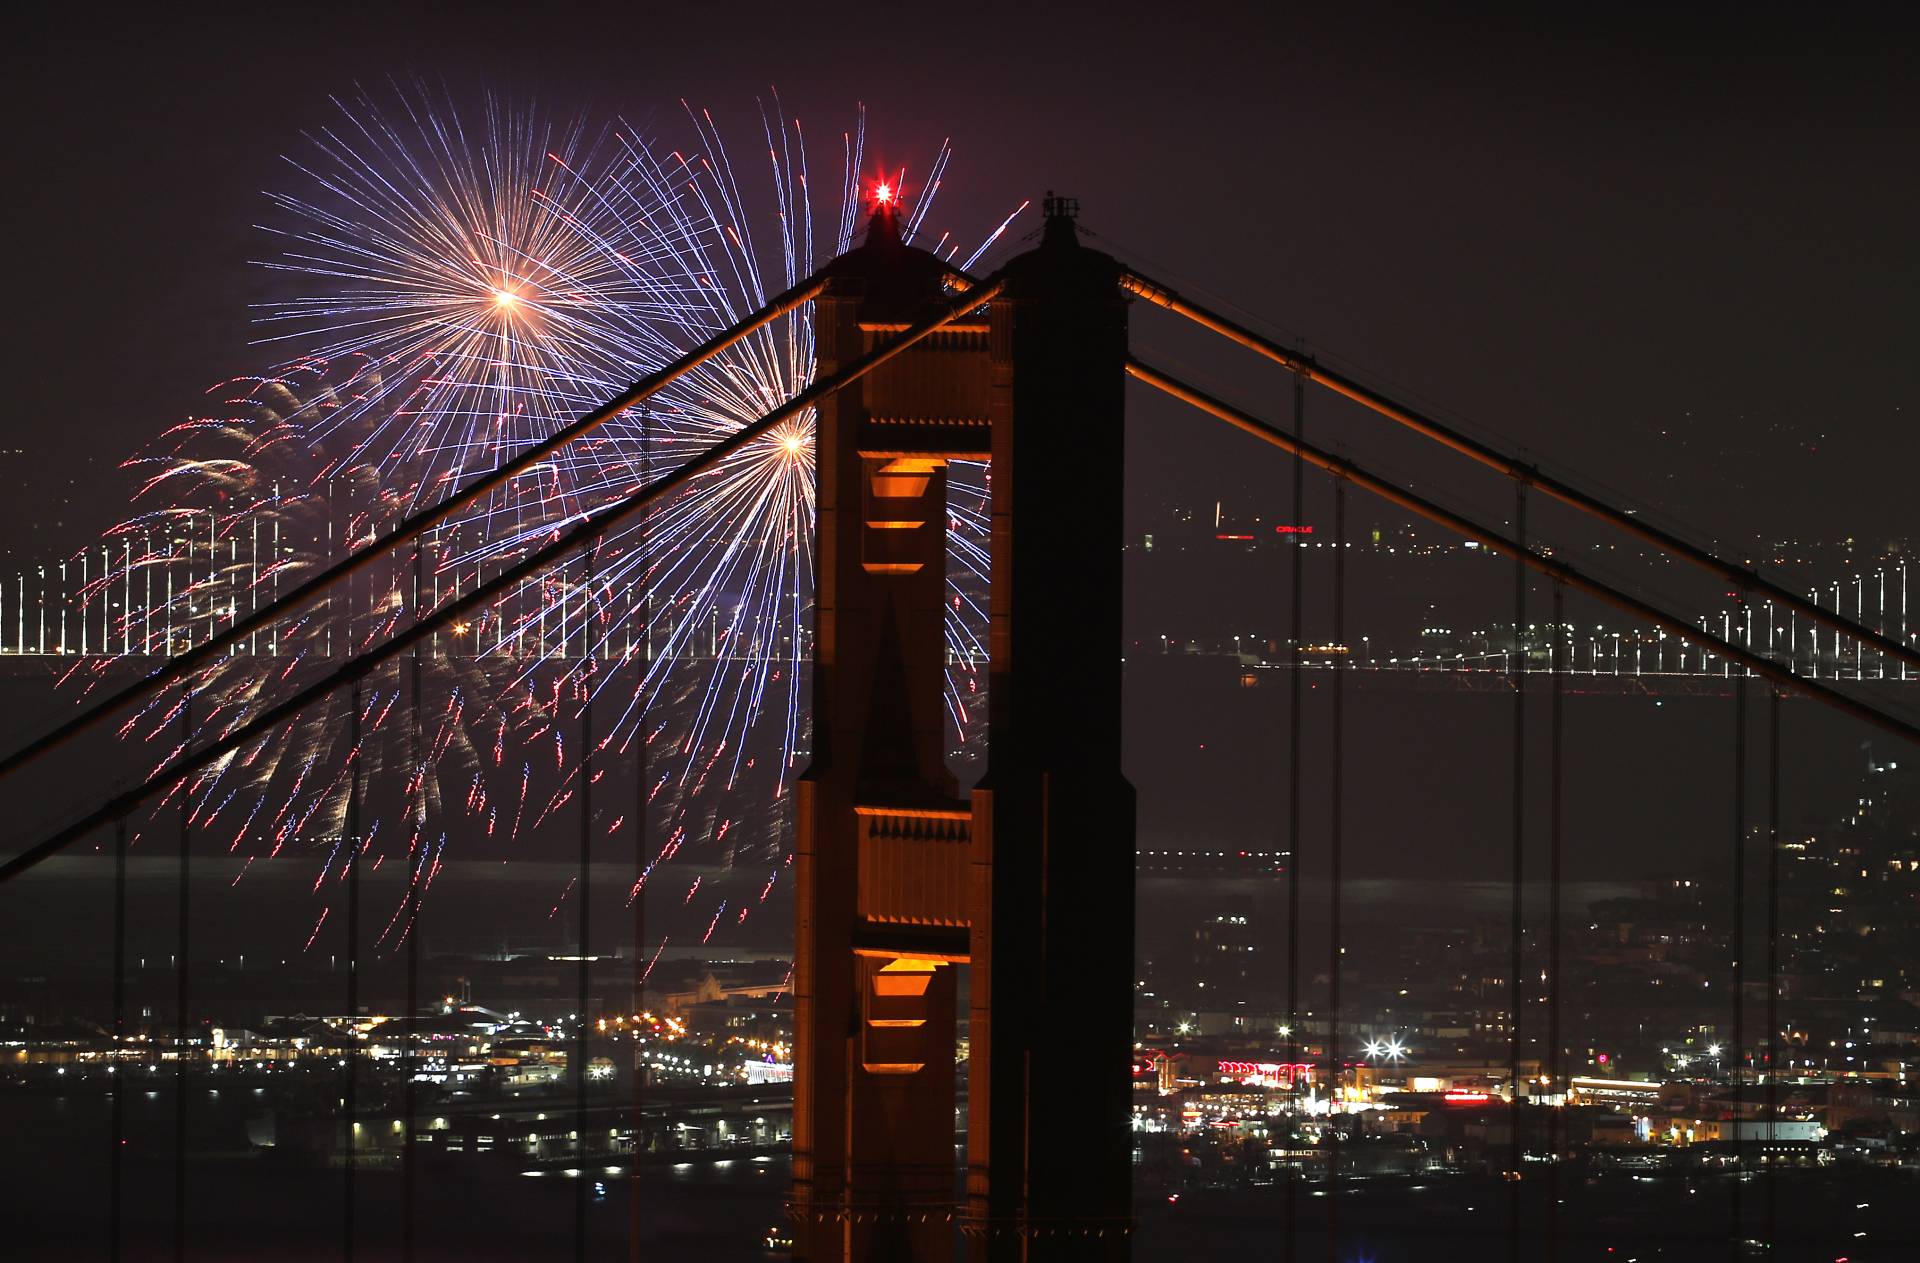 A display of fireworks at night by a bridge.